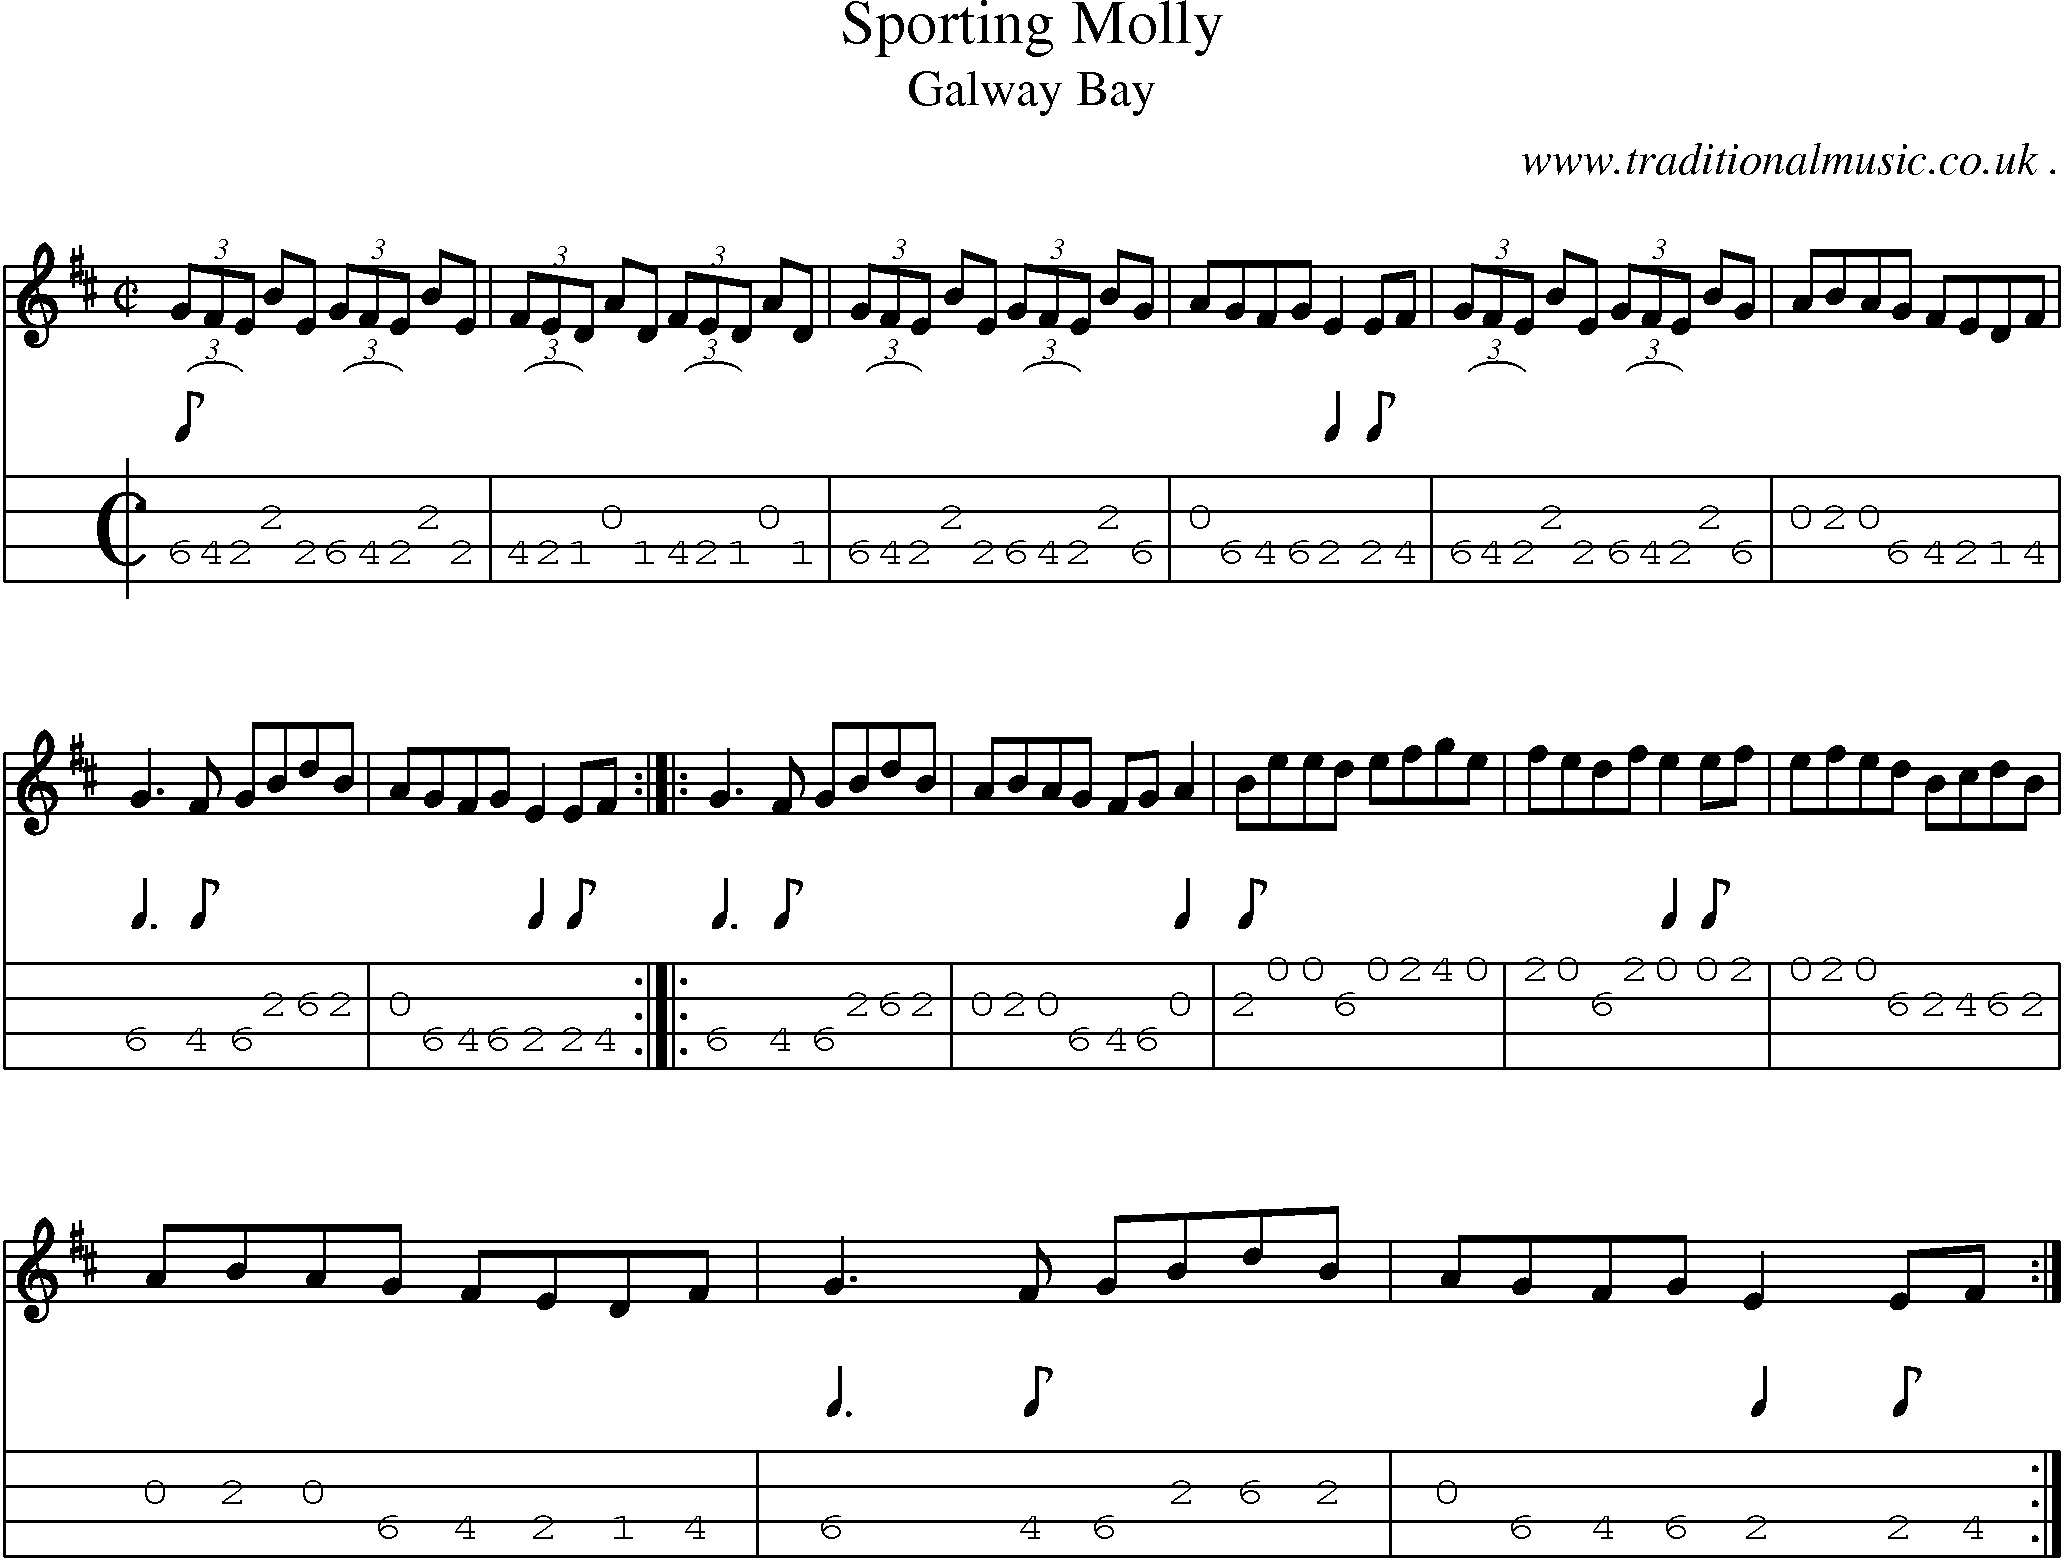 Sheet-Music and Mandolin Tabs for Sporting Molly